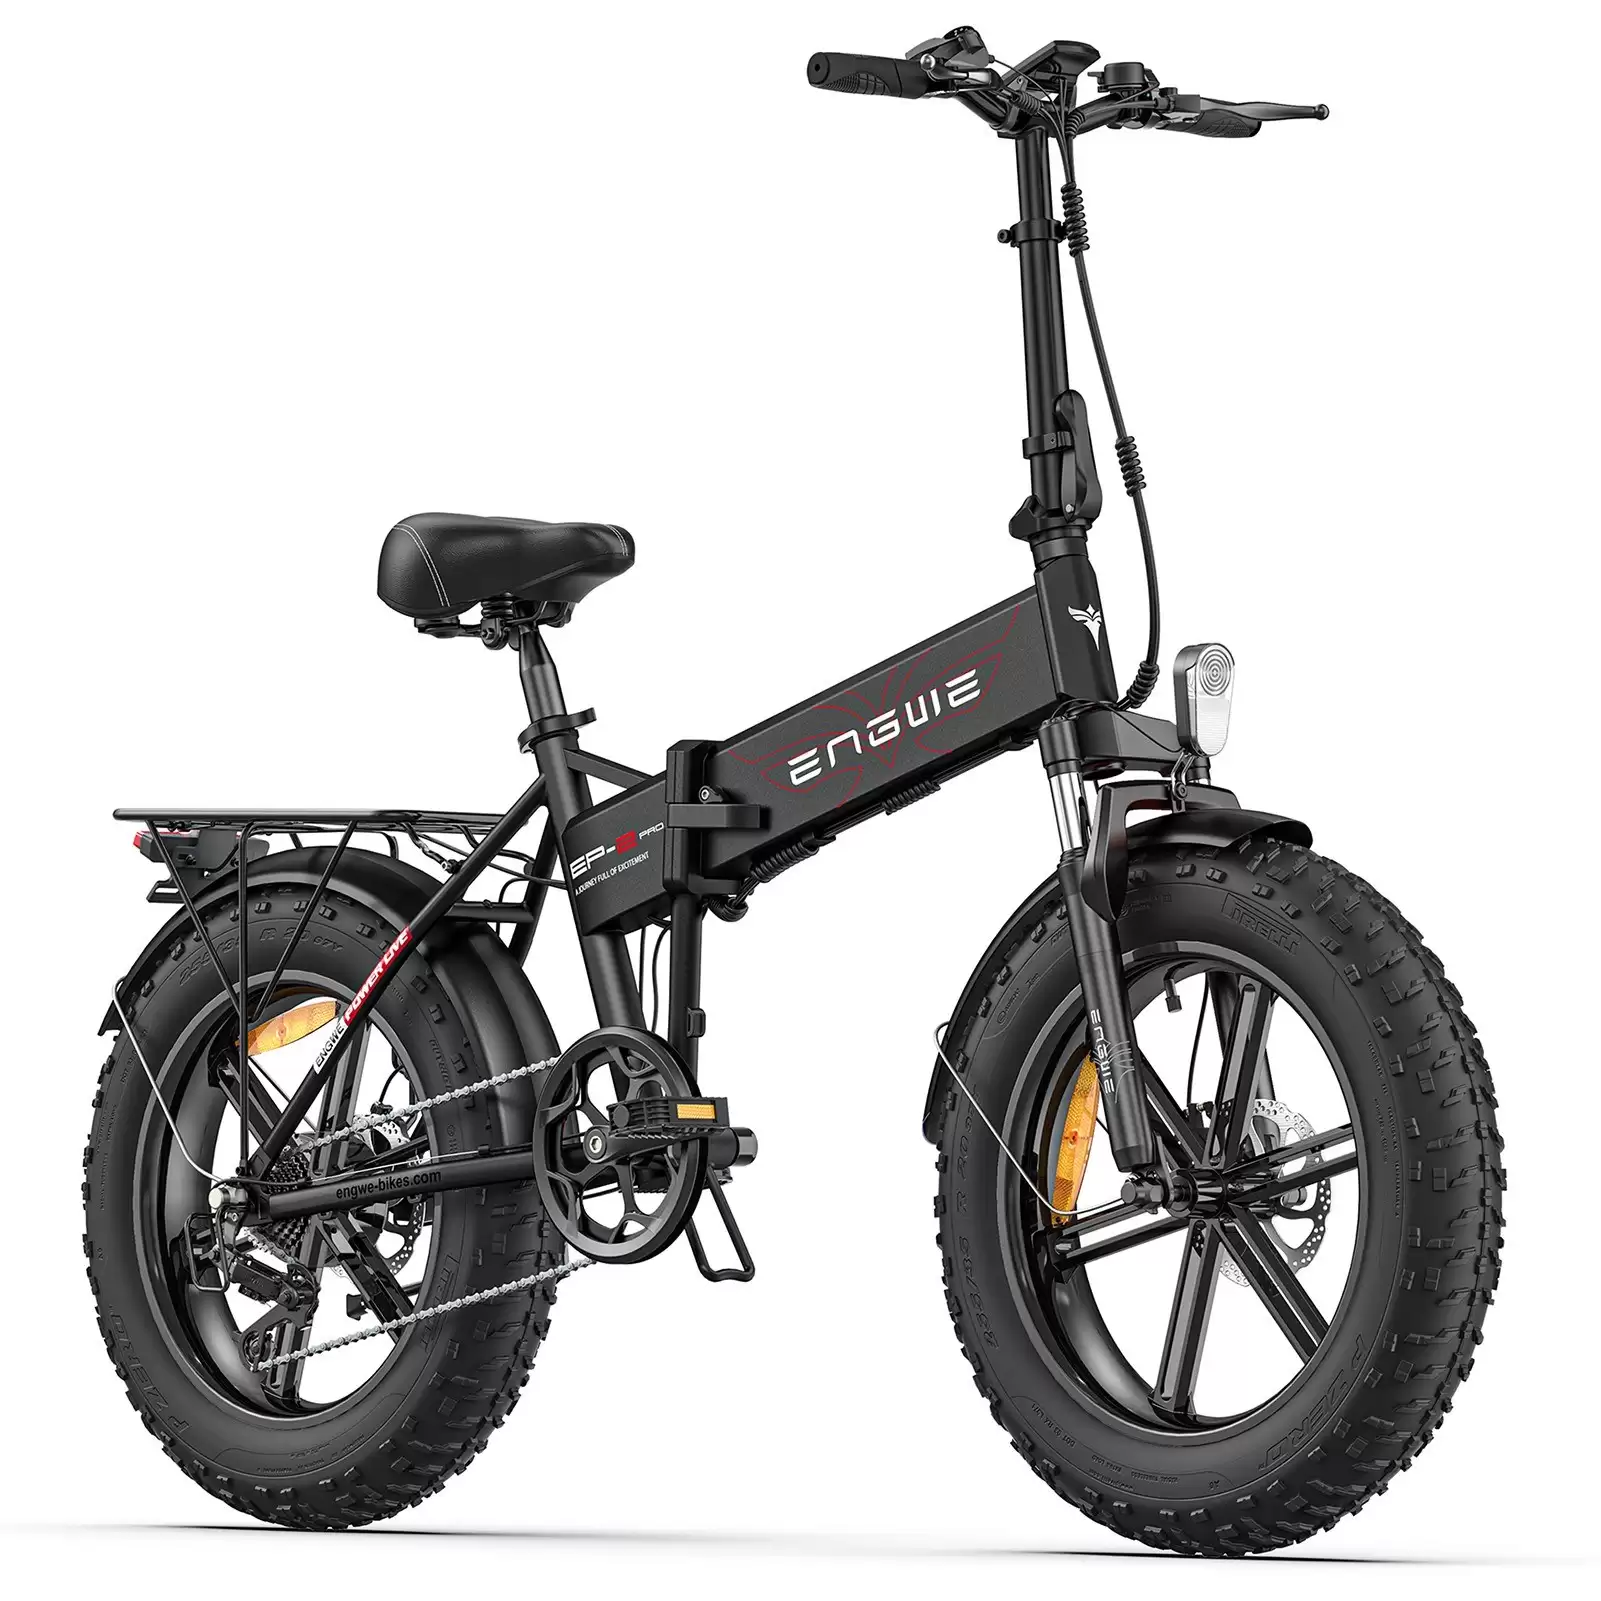 Order In Just $899 Engwe Ep-2 Pro Folding Electric Bike With This Discount Coupon At Tomtop